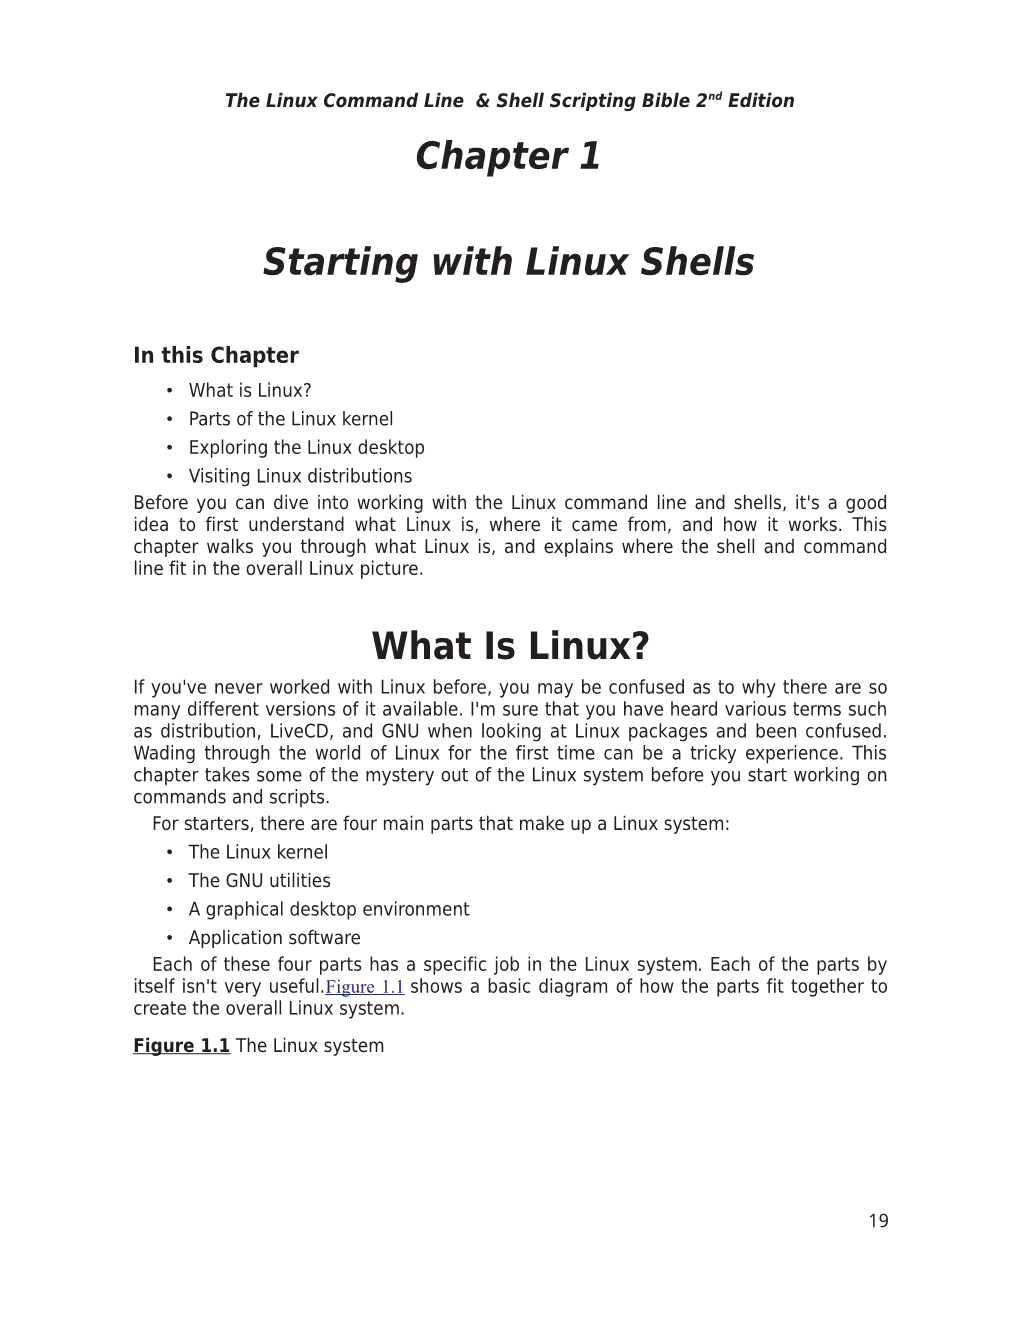 Chapter 1 Starting with Linu Shells What Is Linux?